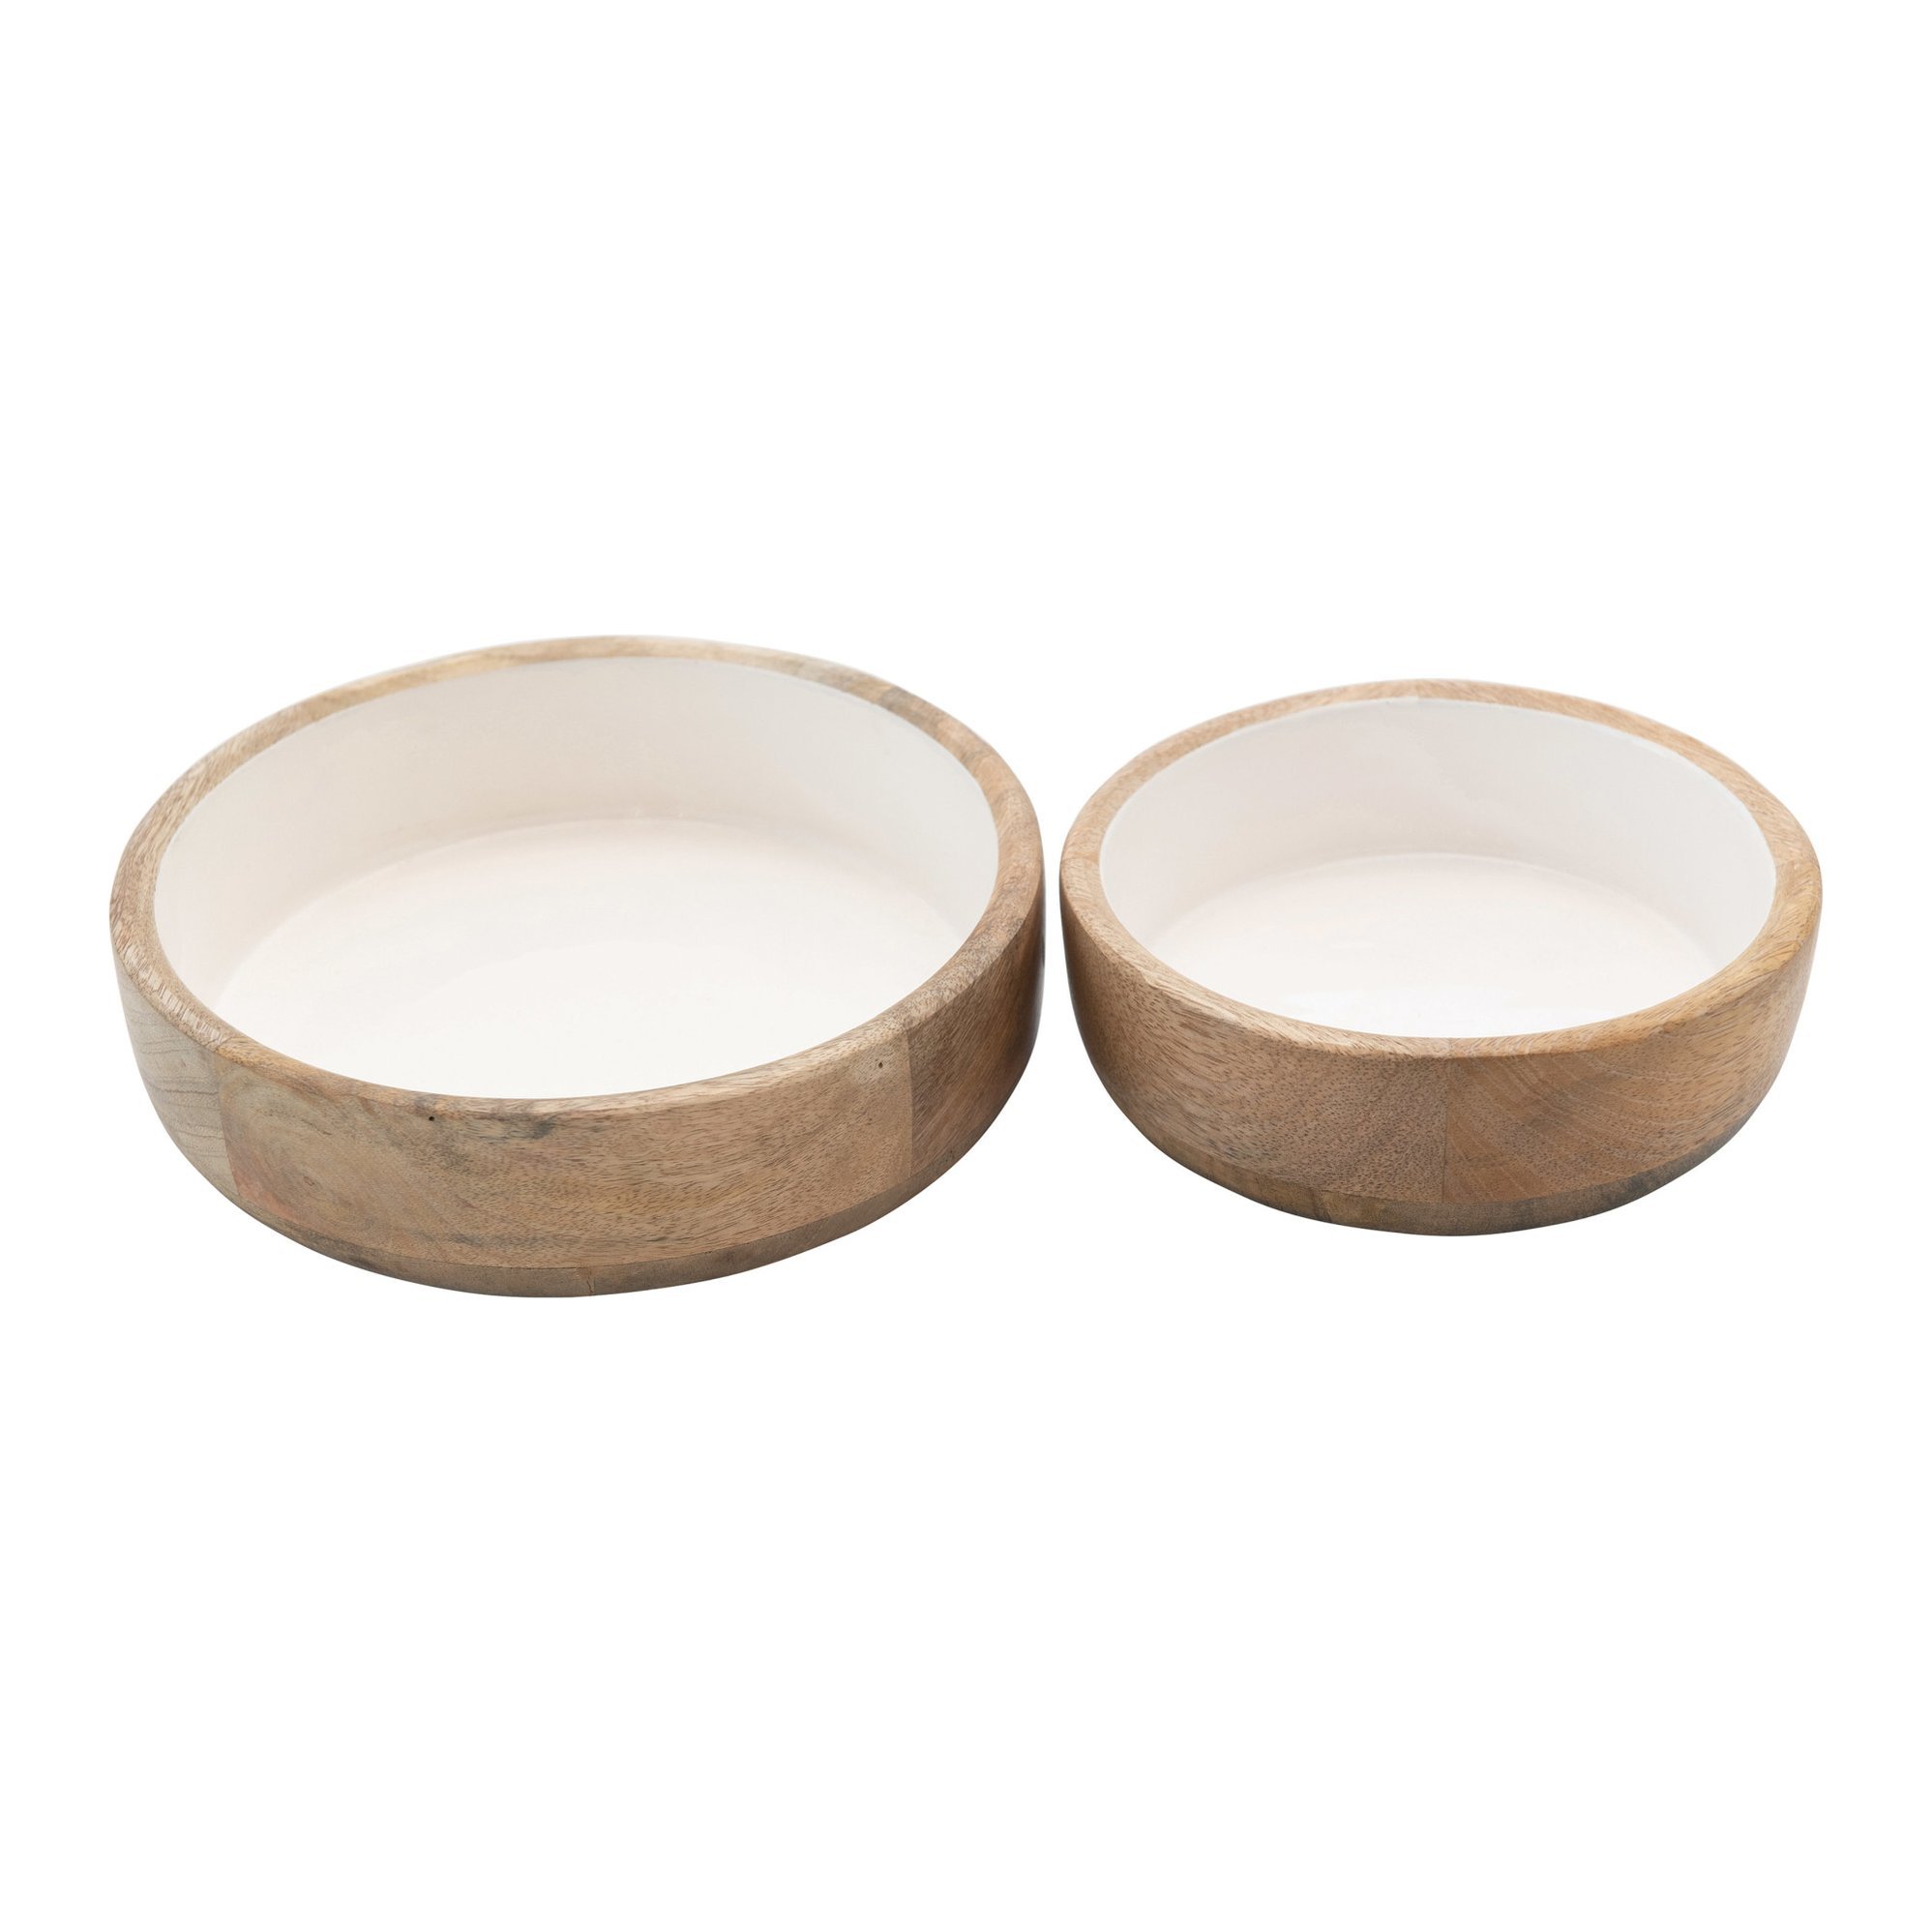 Wood and White Bowls